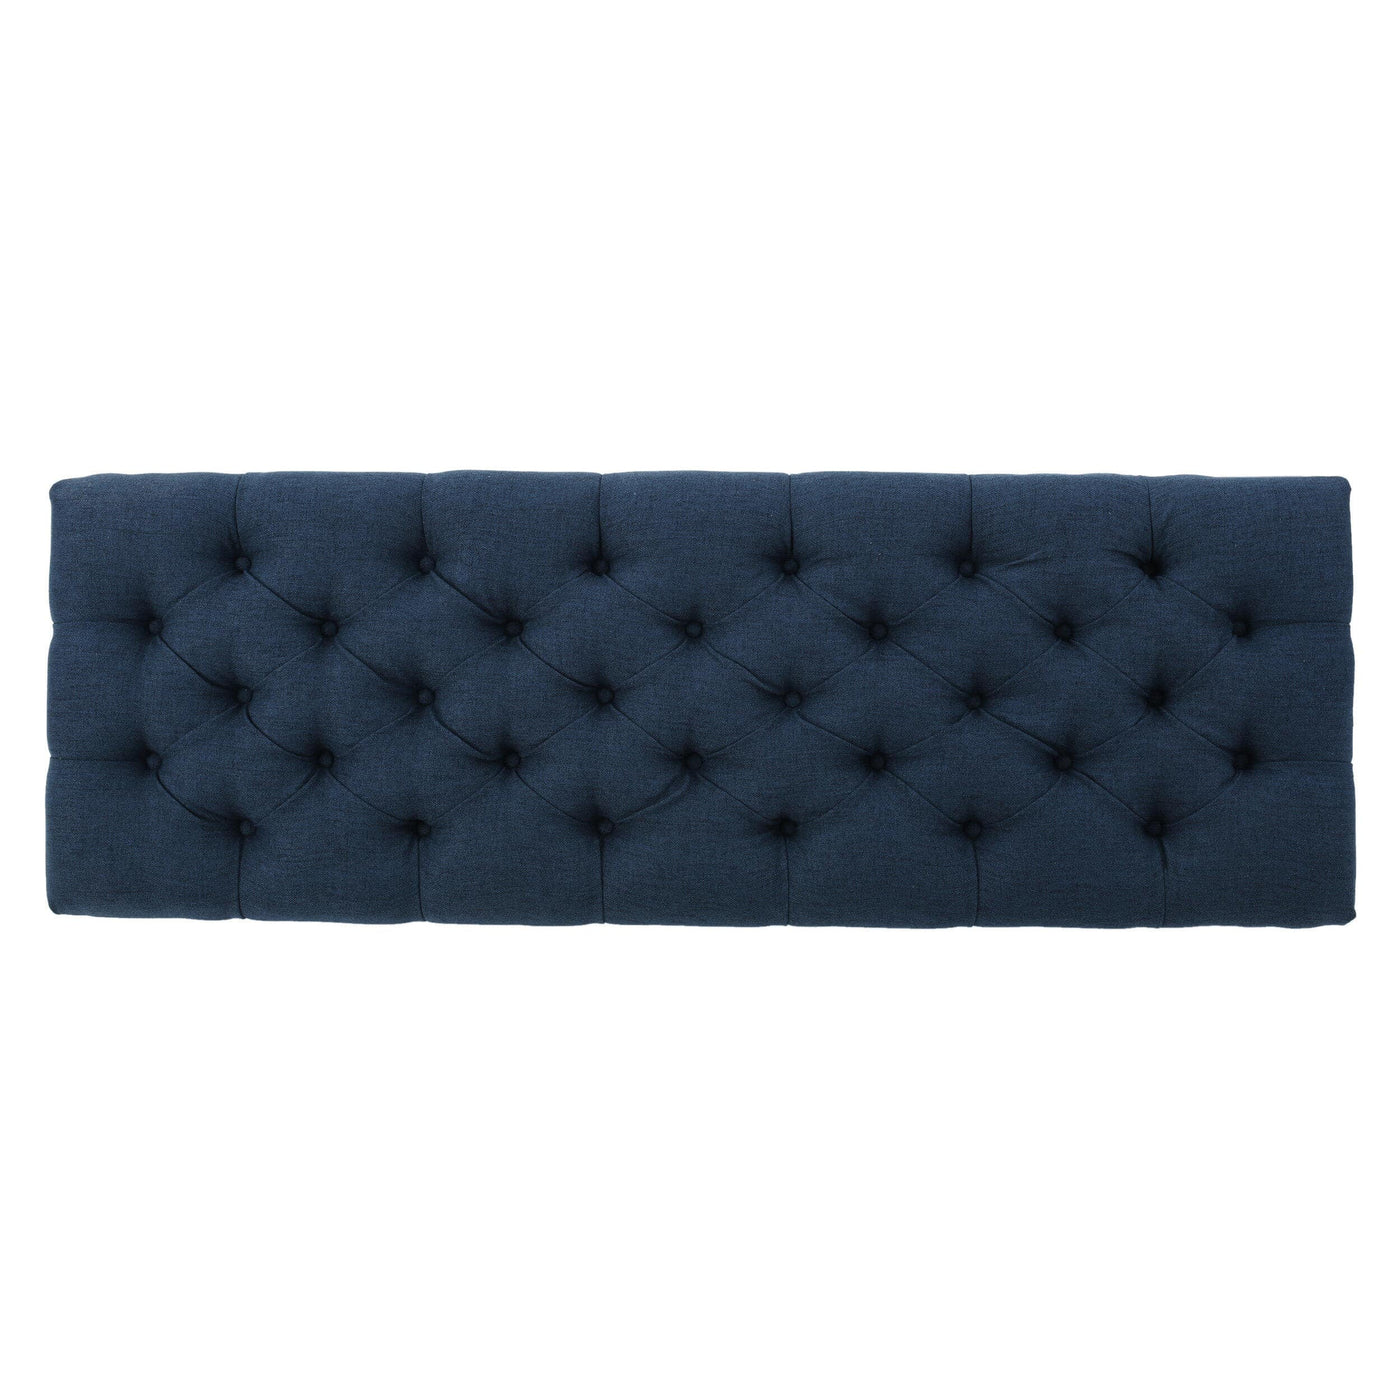 Noble House Dark Blue Tufted Fabric Storage Bench - $130